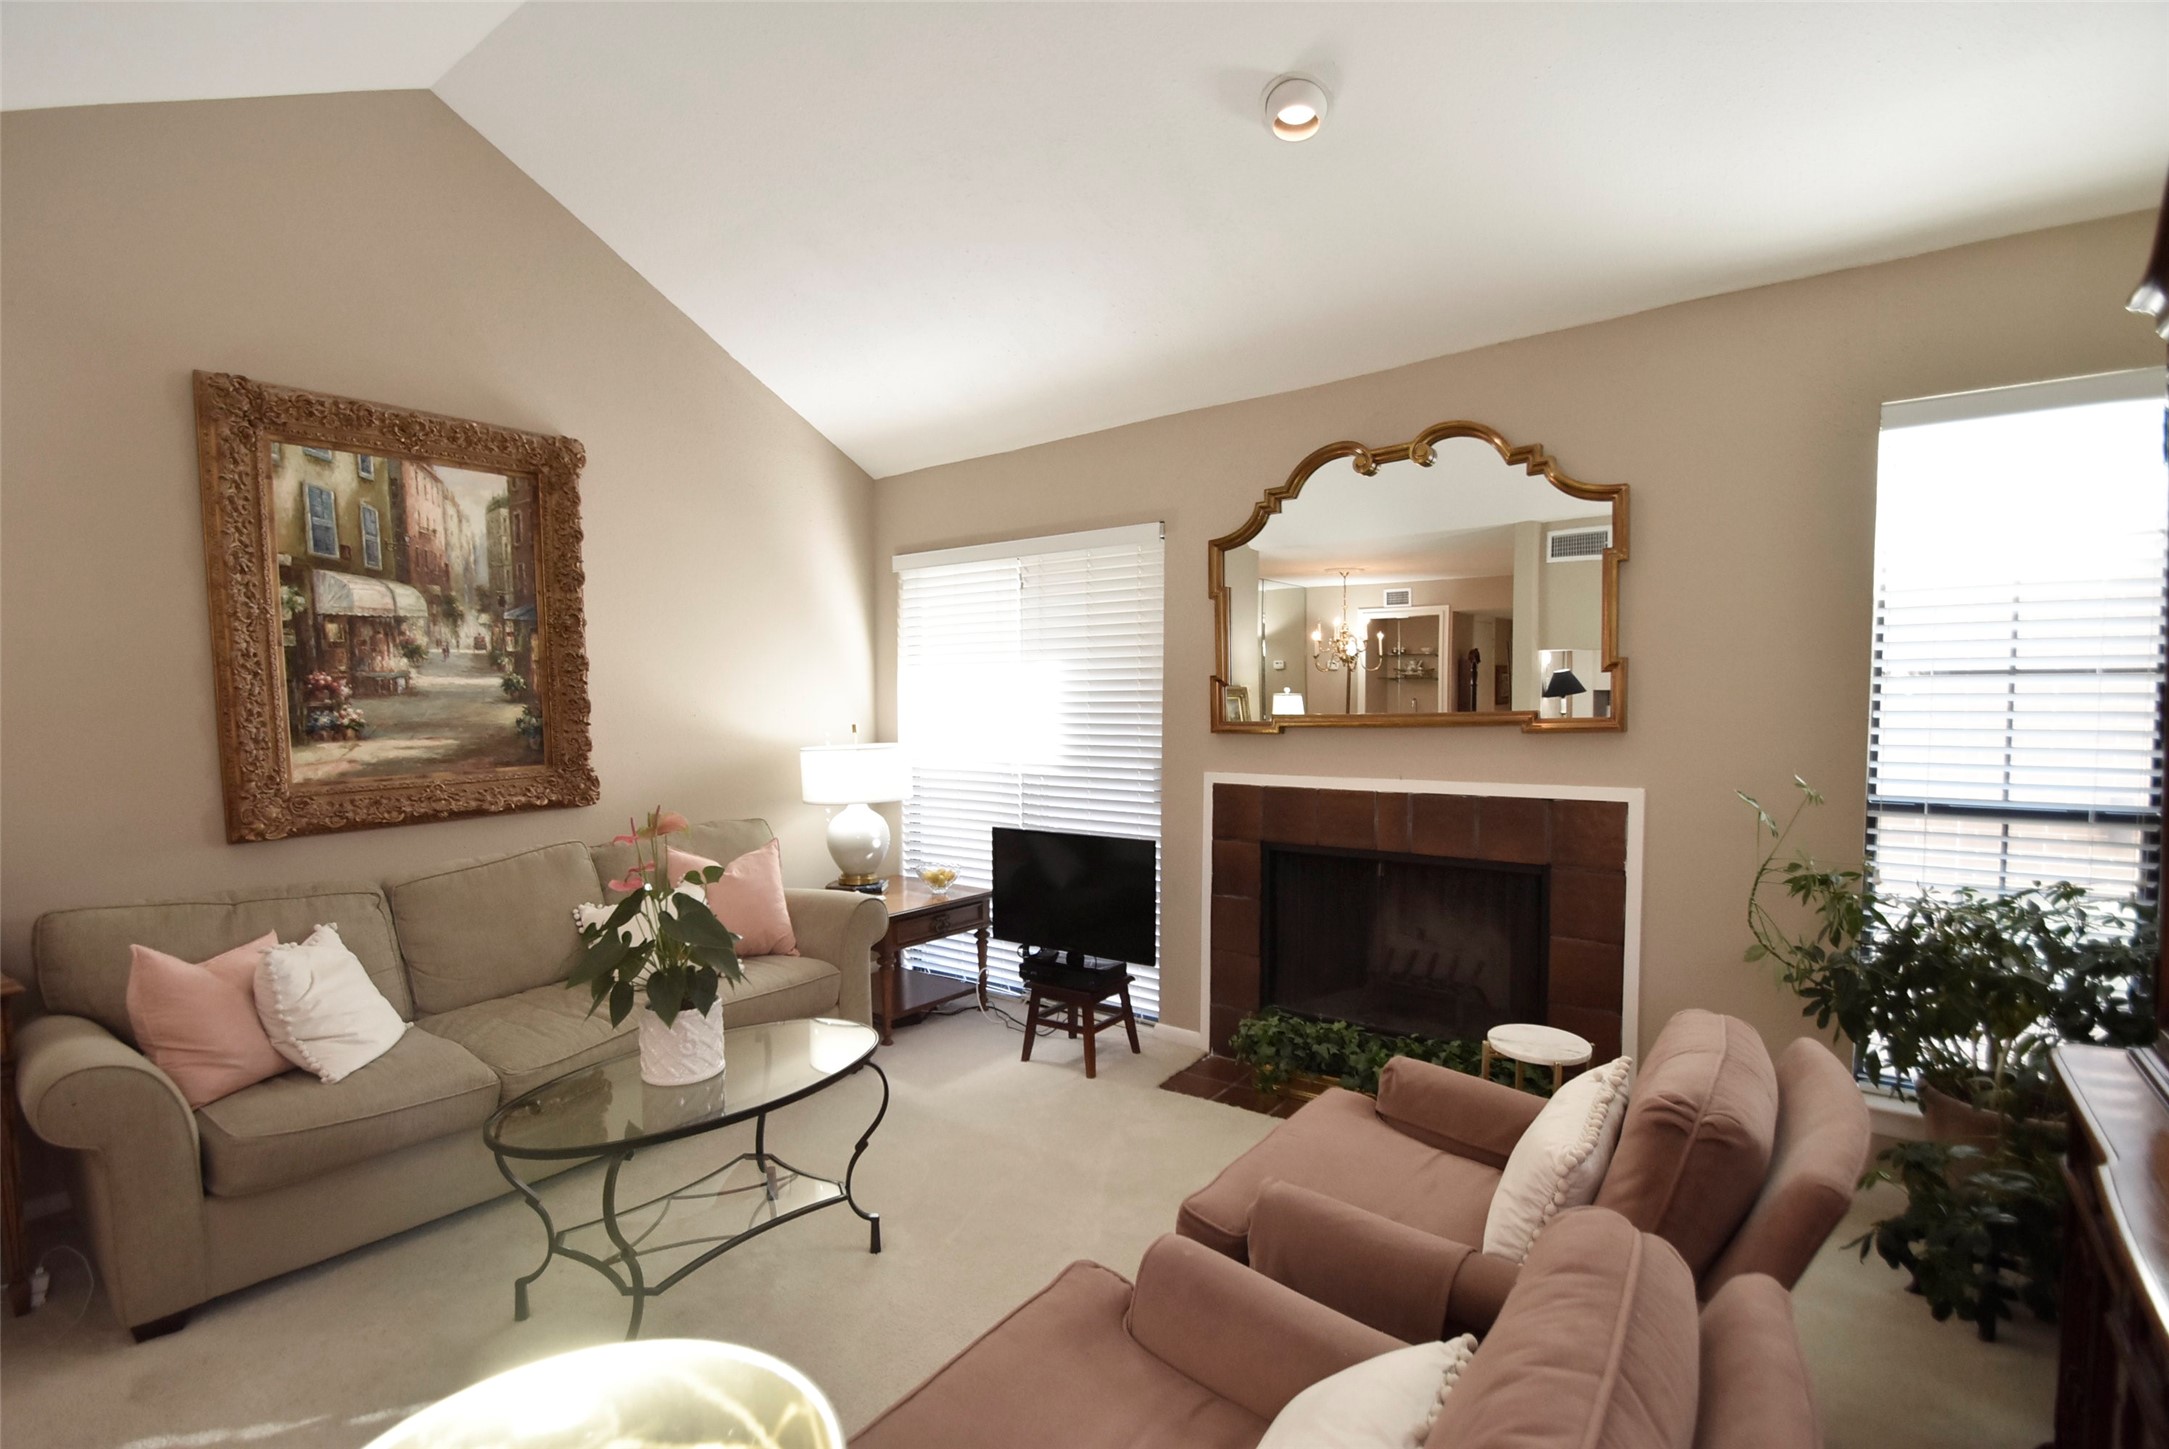 Another look at the terrific living area with a great amount of natural light and a wood-burning fireplace.